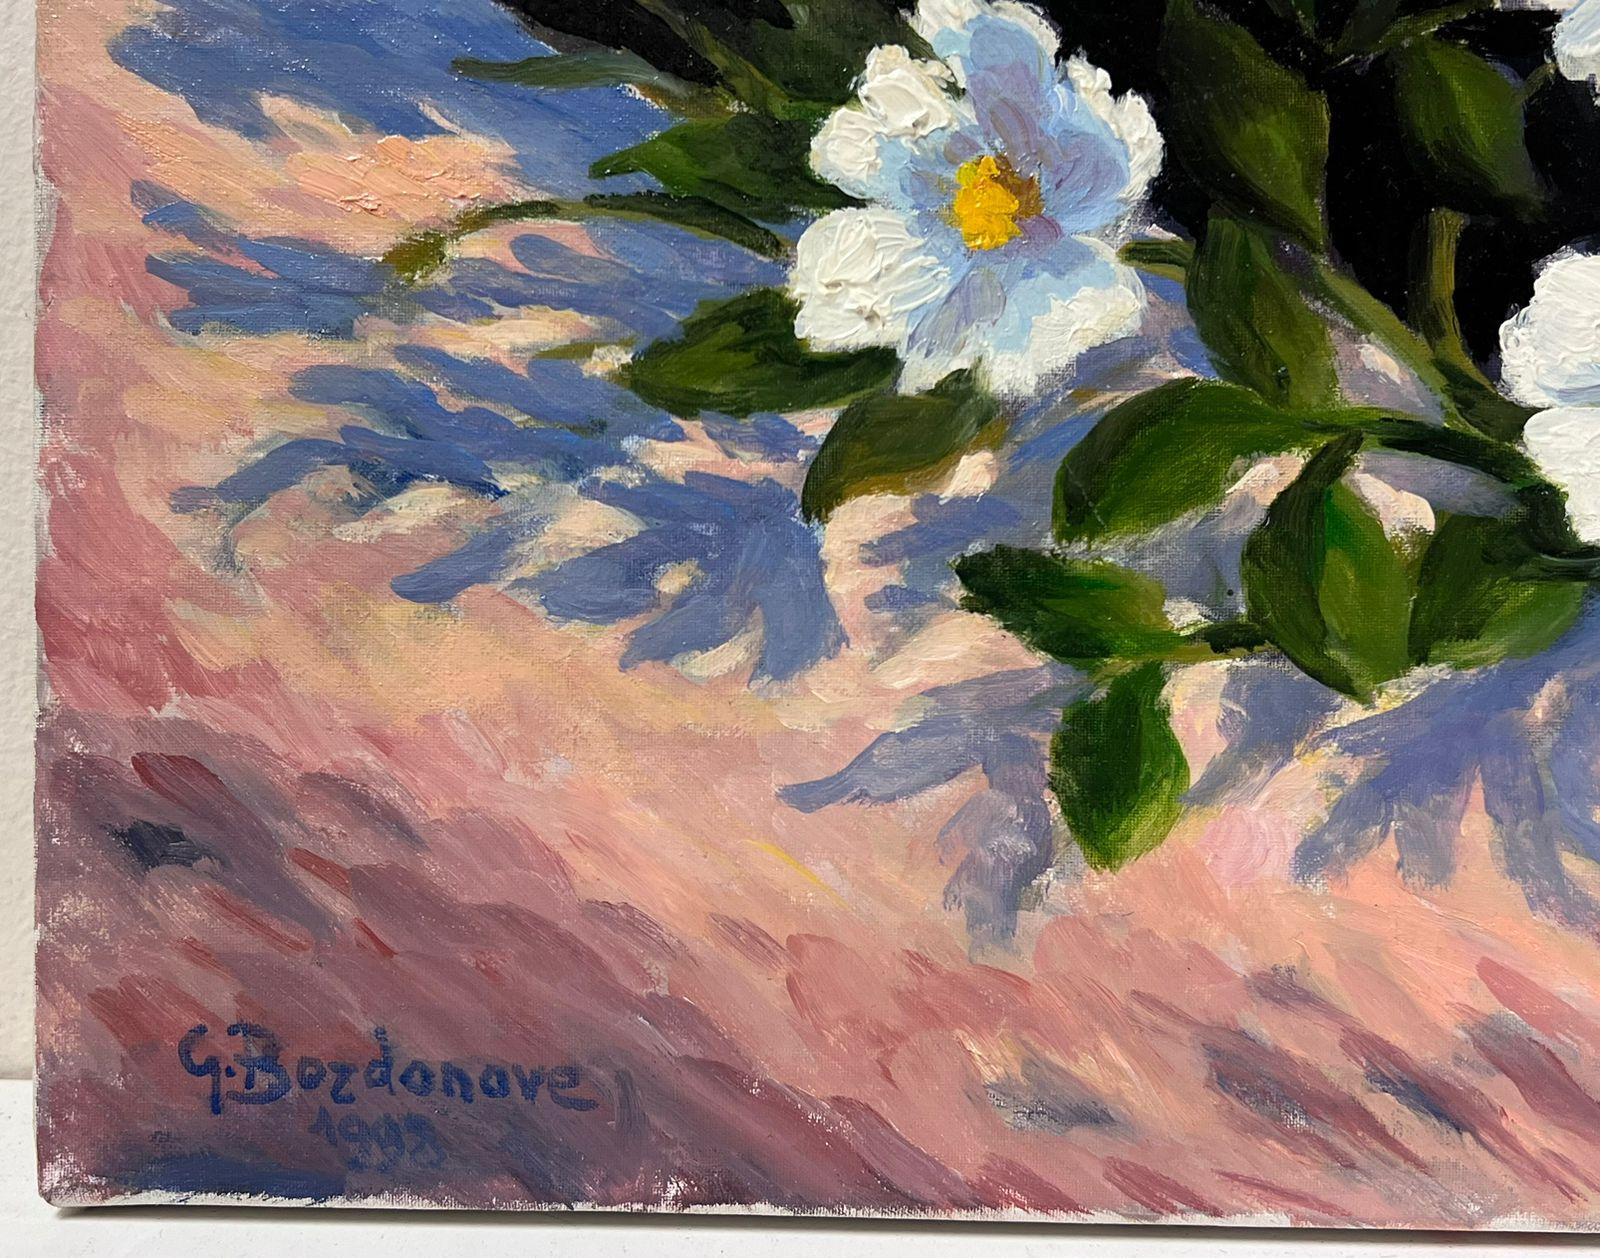 Flowers on the Rocks
by Georges Bordonave (French contemporary)
signed oil painting on canvas, unframed
dated 1998
canvas: 13 x 16 inches
condition: very good
provenance: from a large private collection of this artists work, western Paris, France. 